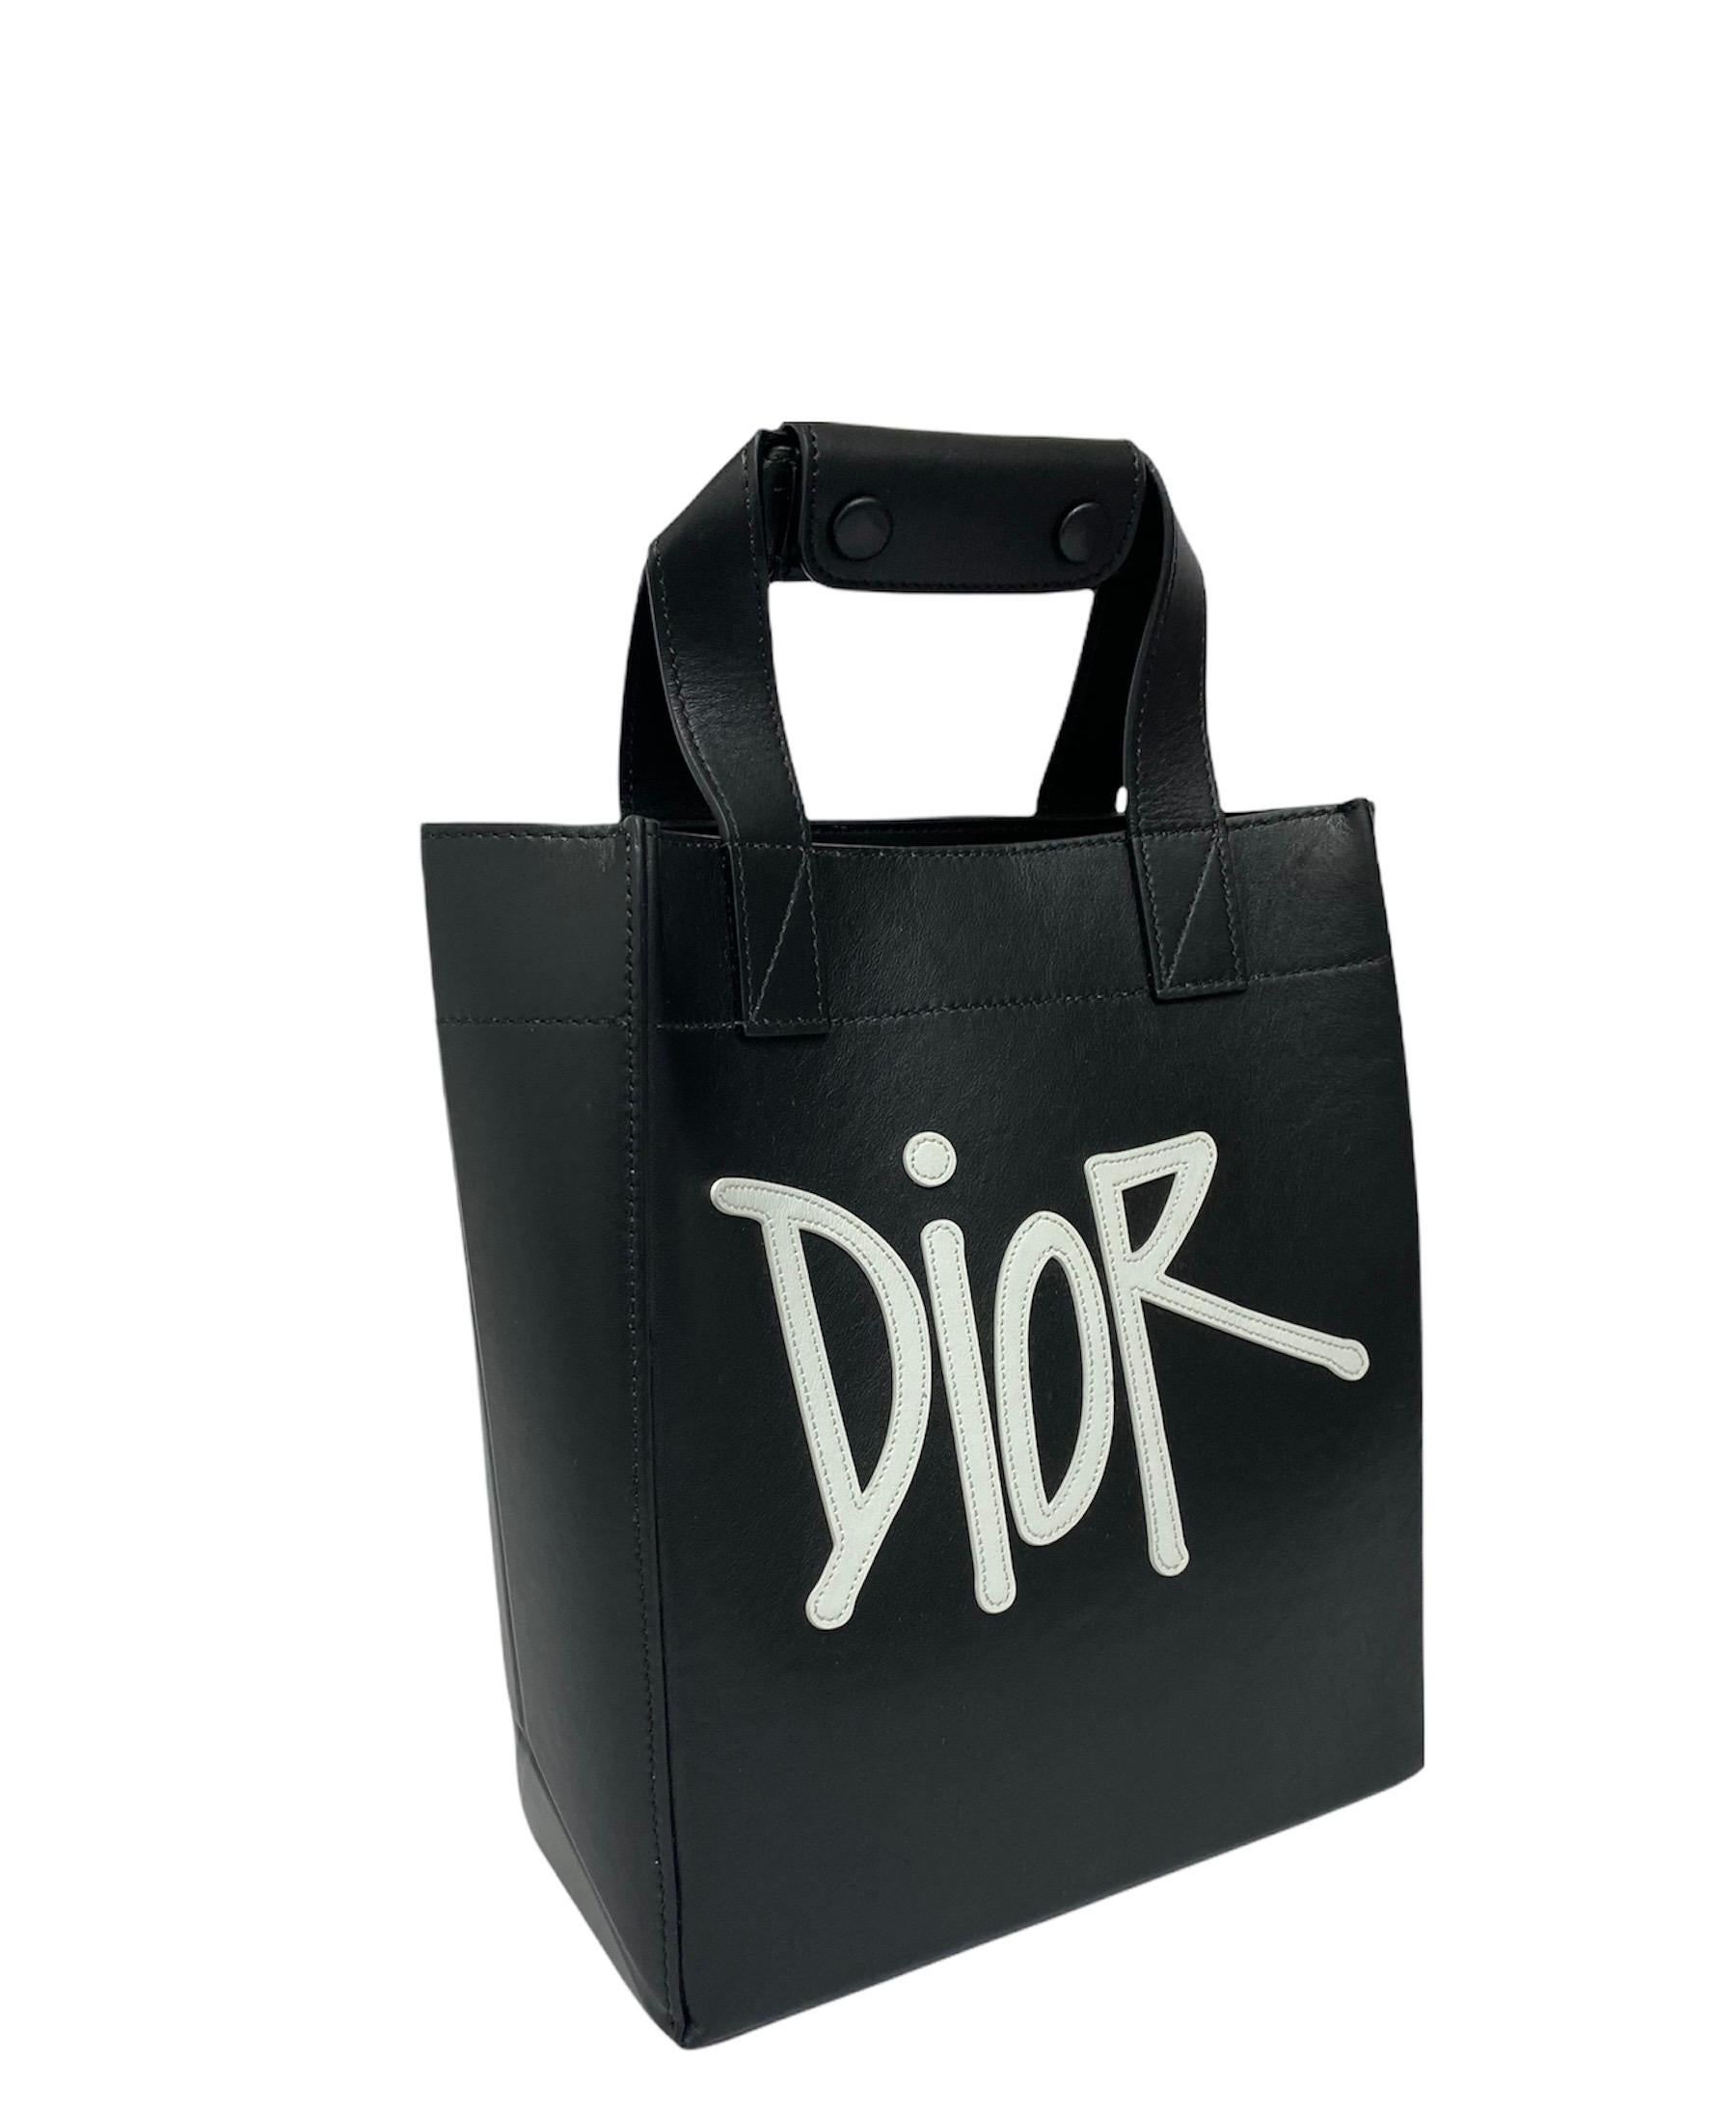 Dior x Shawn Limited Edition tote bag in black and white leather with black hardware.It has a central opening with button closure. The interior is lined with smooth black leather, and also features an internal side pocket.In addition, it is equipped